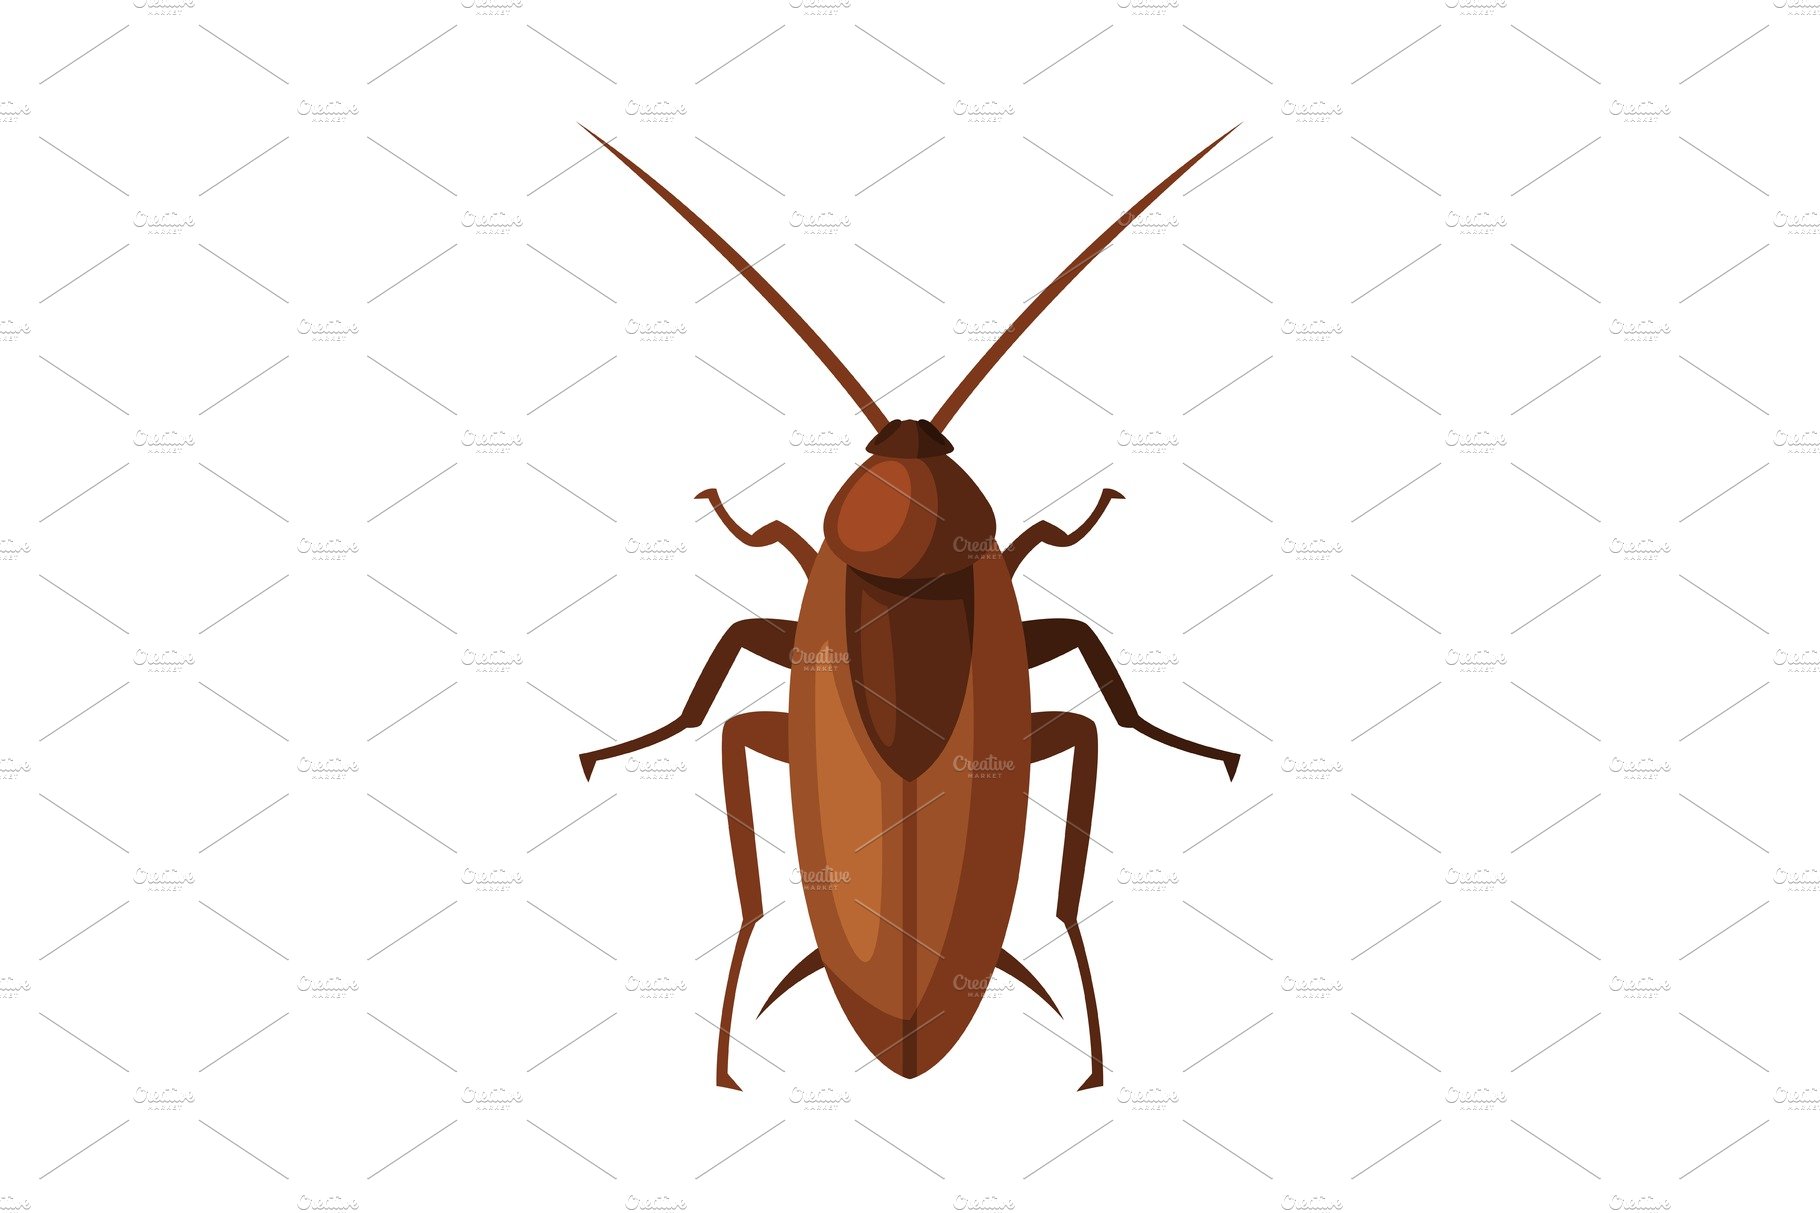 Red Cockroach Insect, Pest Control cover image.